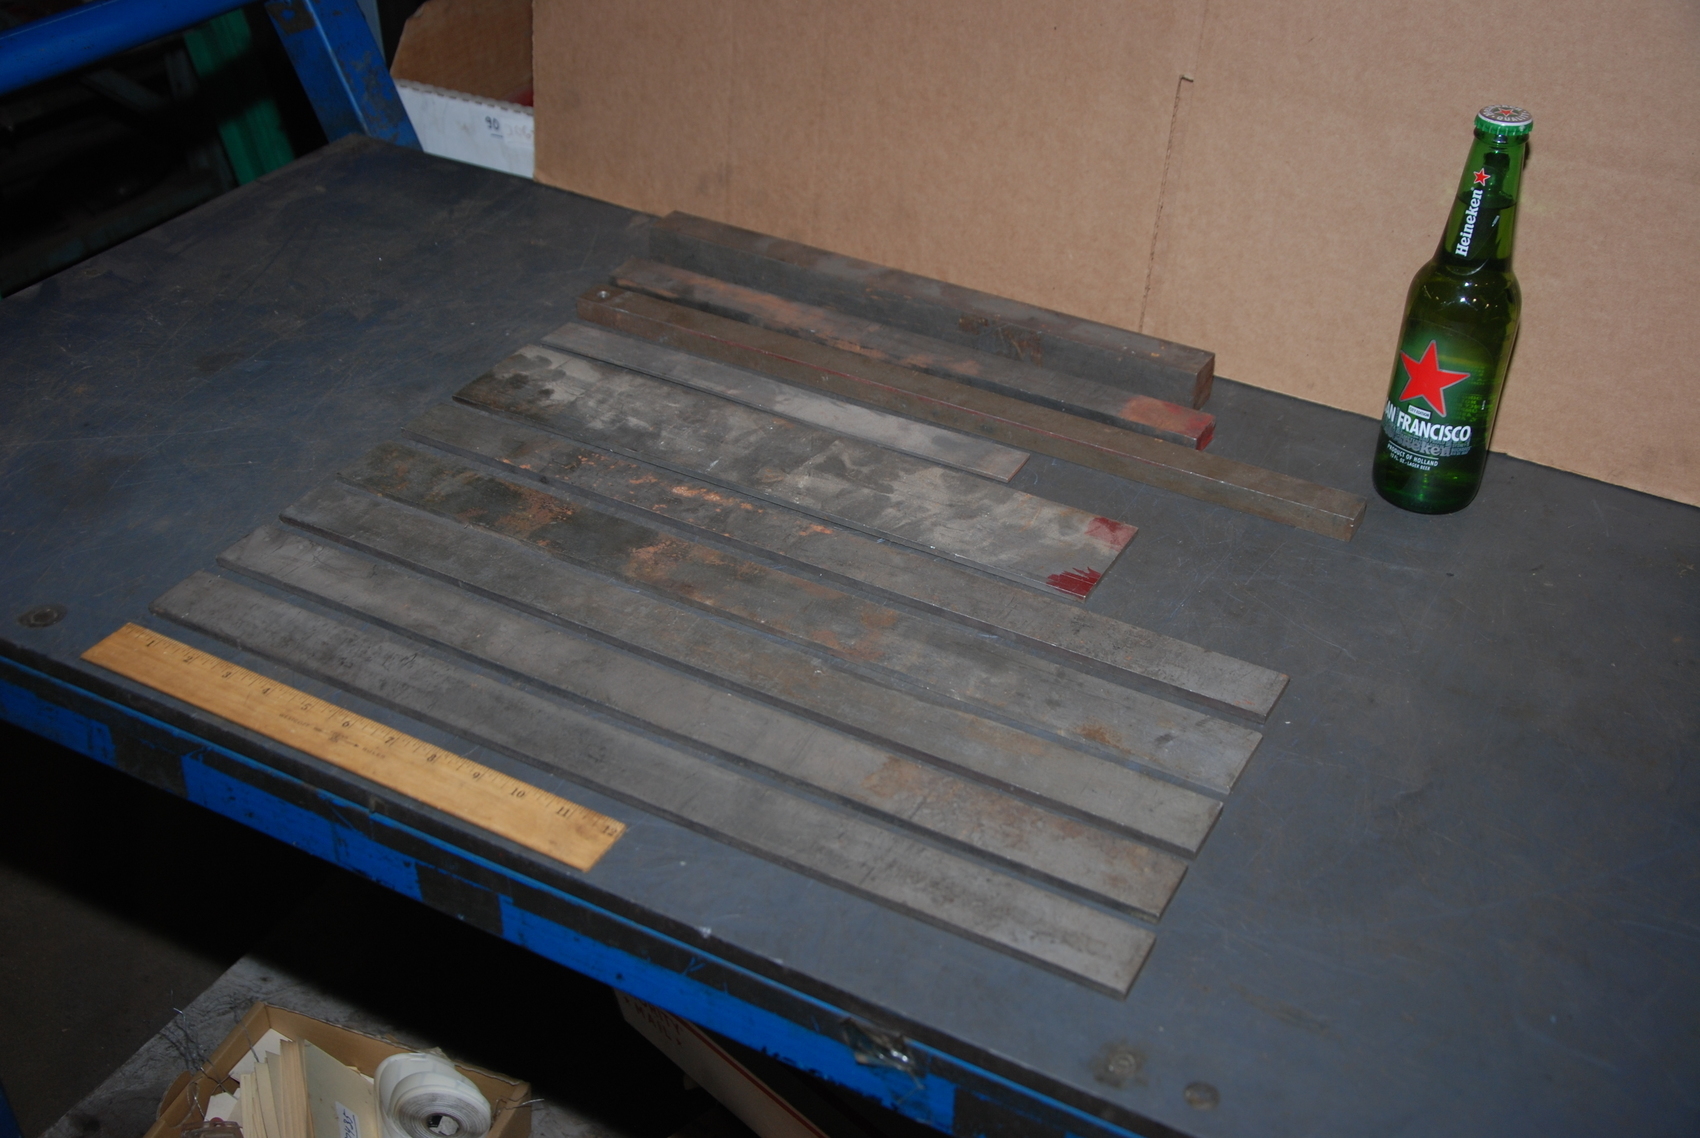 Lot of 10 steel Plates for blacksmith anvil,30 lbs